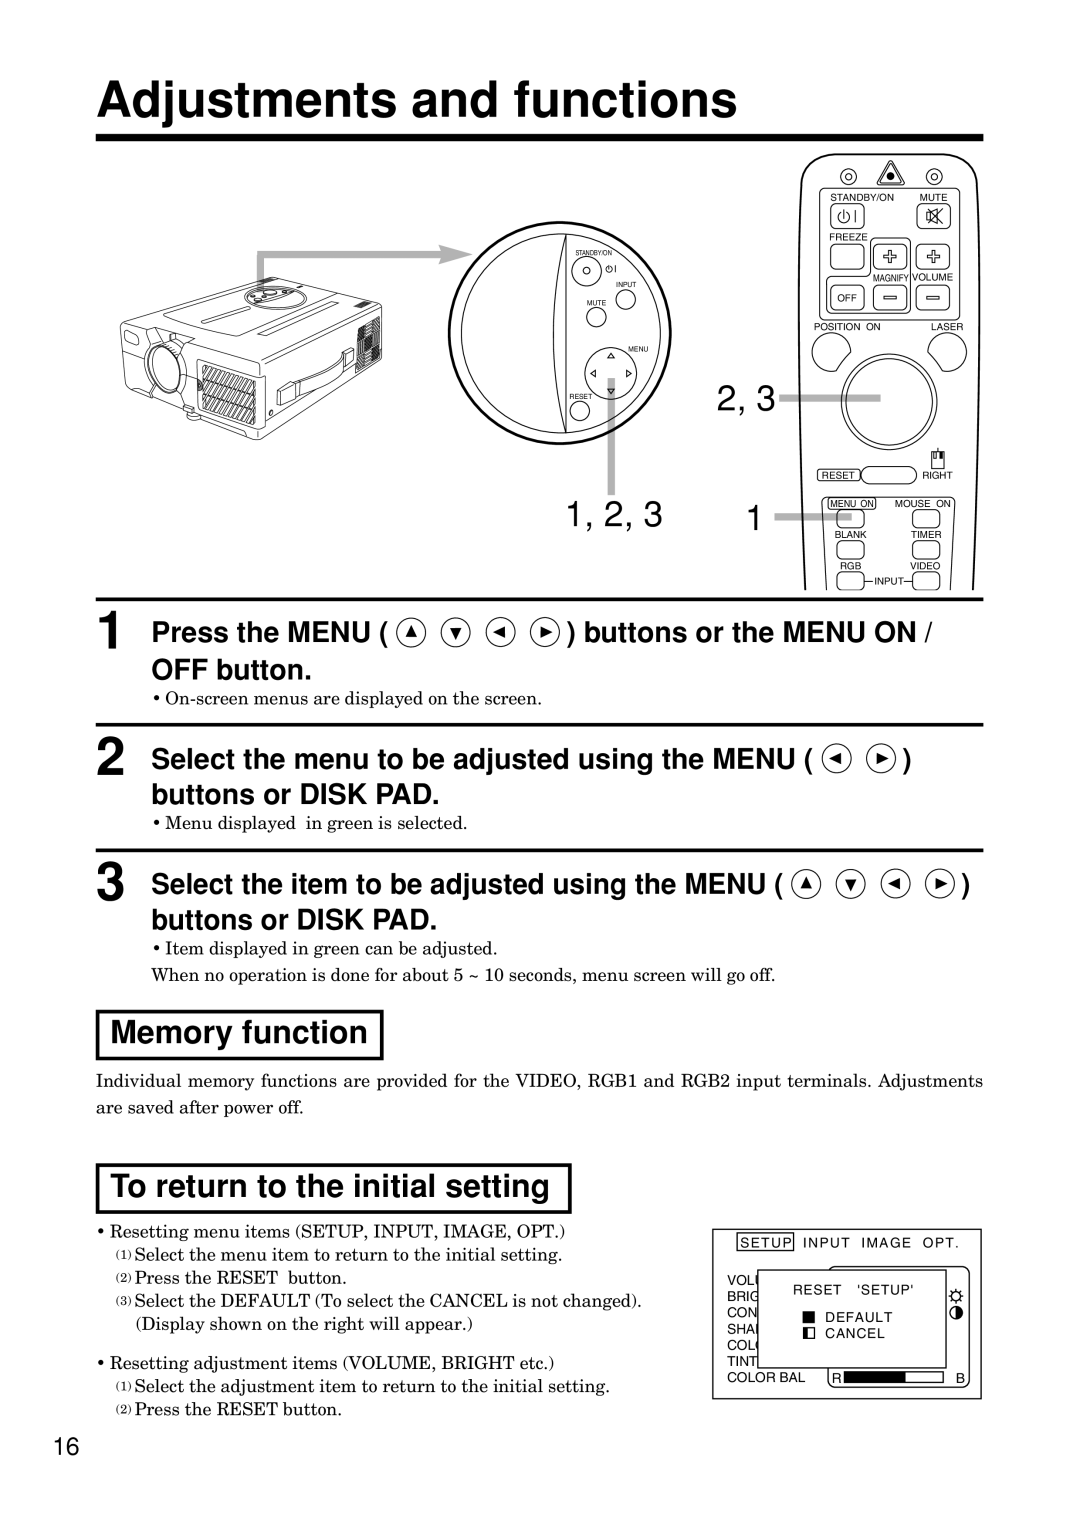 Hitachi CP-S845W Adjustments and functions, Memory function, To return to the initial setting, Press the MENU, OFF button 